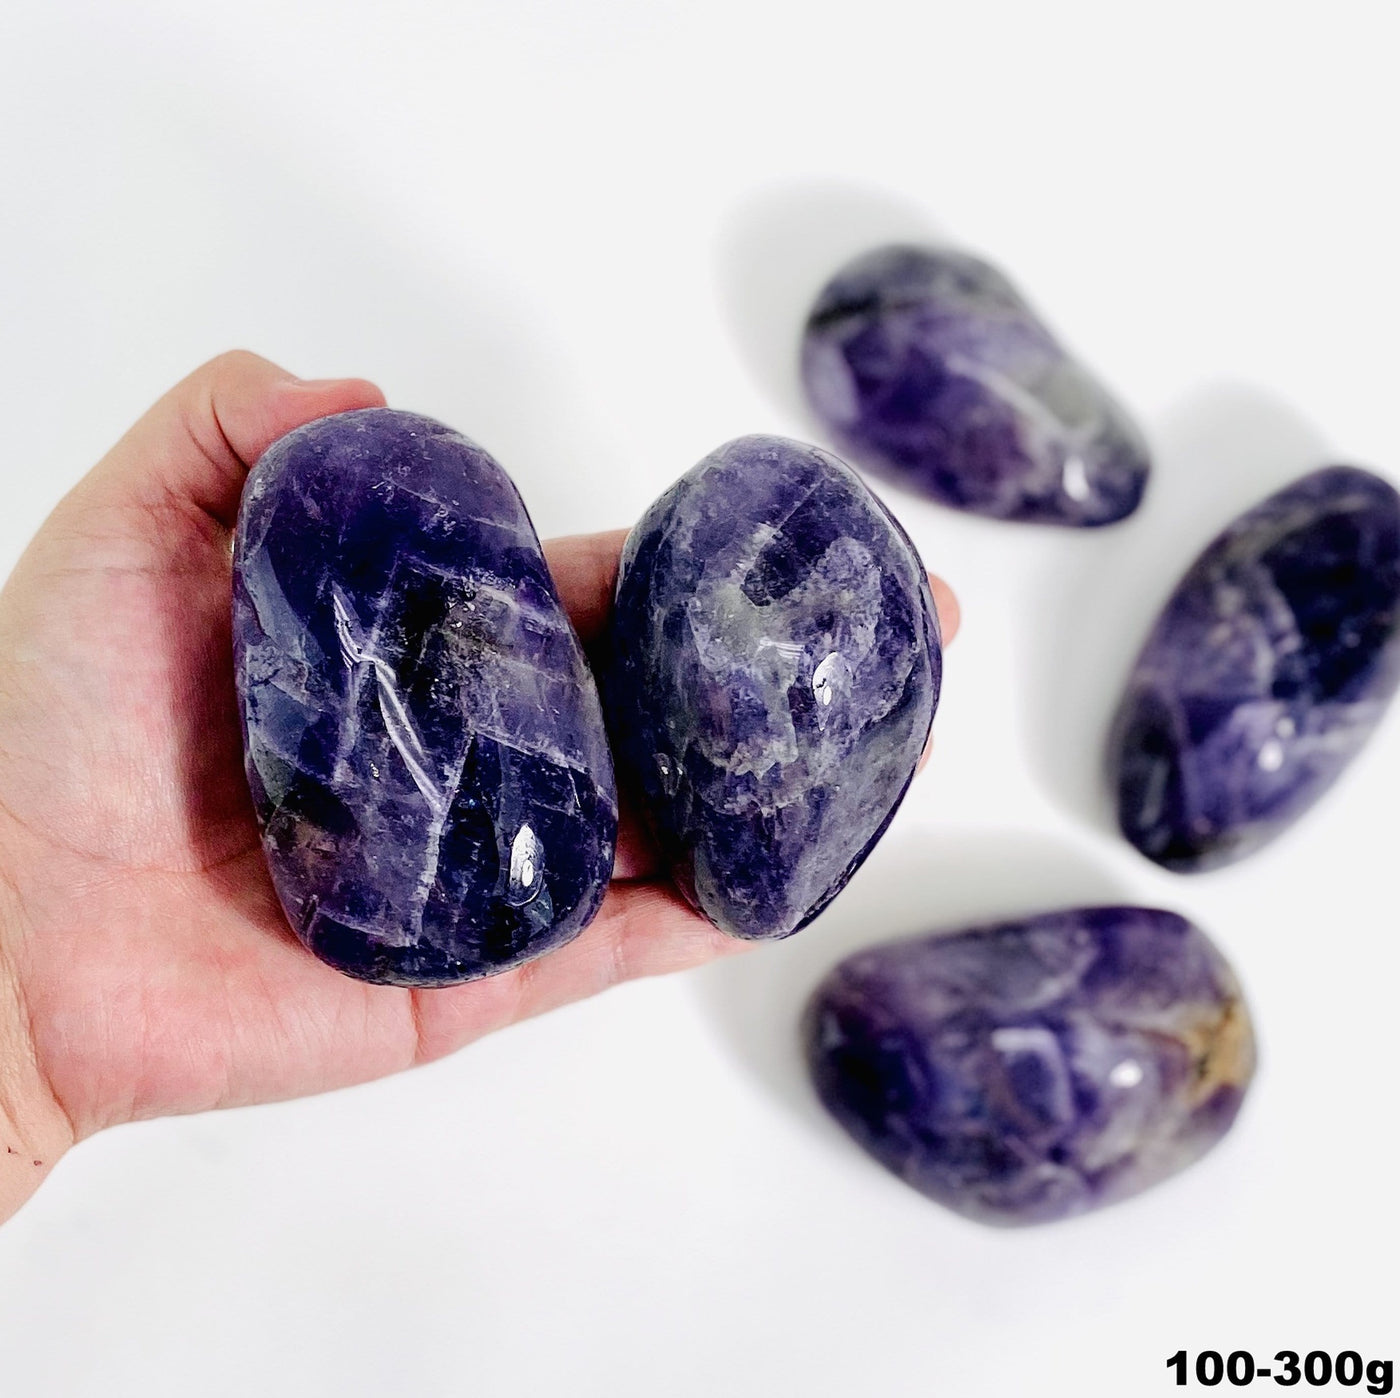 Chevron Amethyst Large Tumbled Stones - Top View of  Five Stones